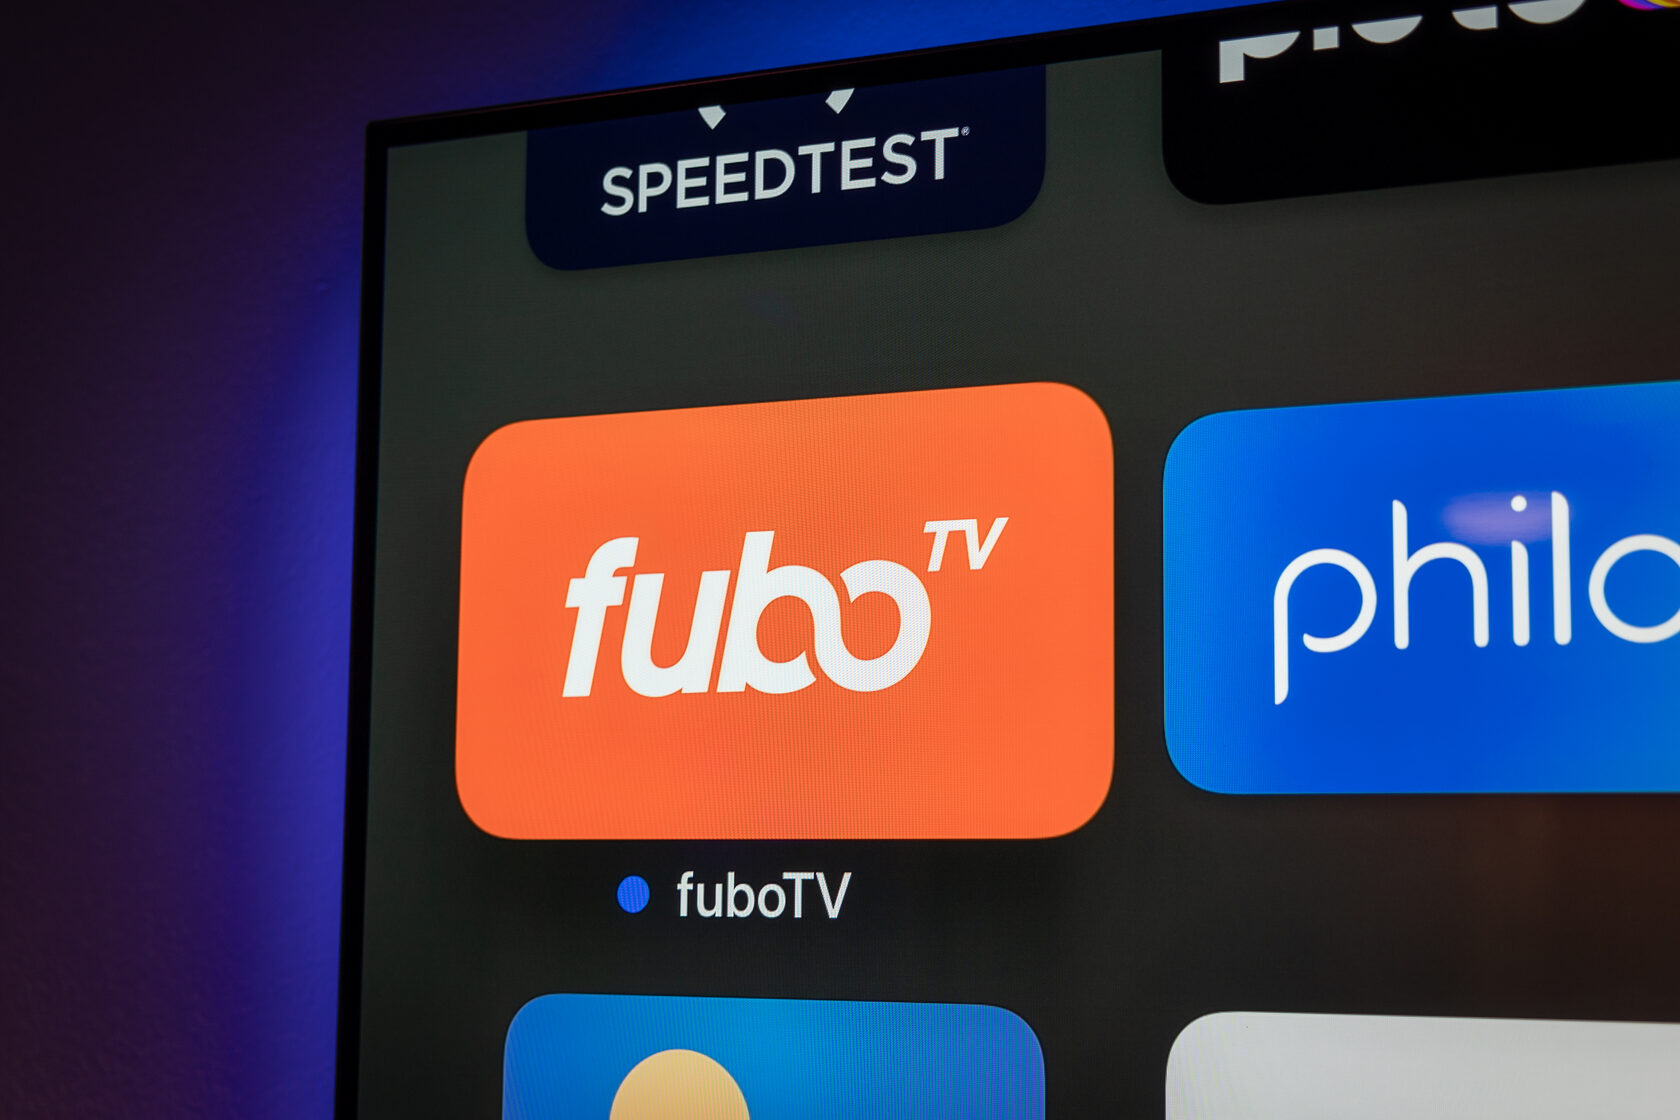 Discover the investment potential of FuboTV stocks, a volatile yet intriguing option for high-risk investors. Explore the company's financials and growth prospects in the competitive world of streaming services.